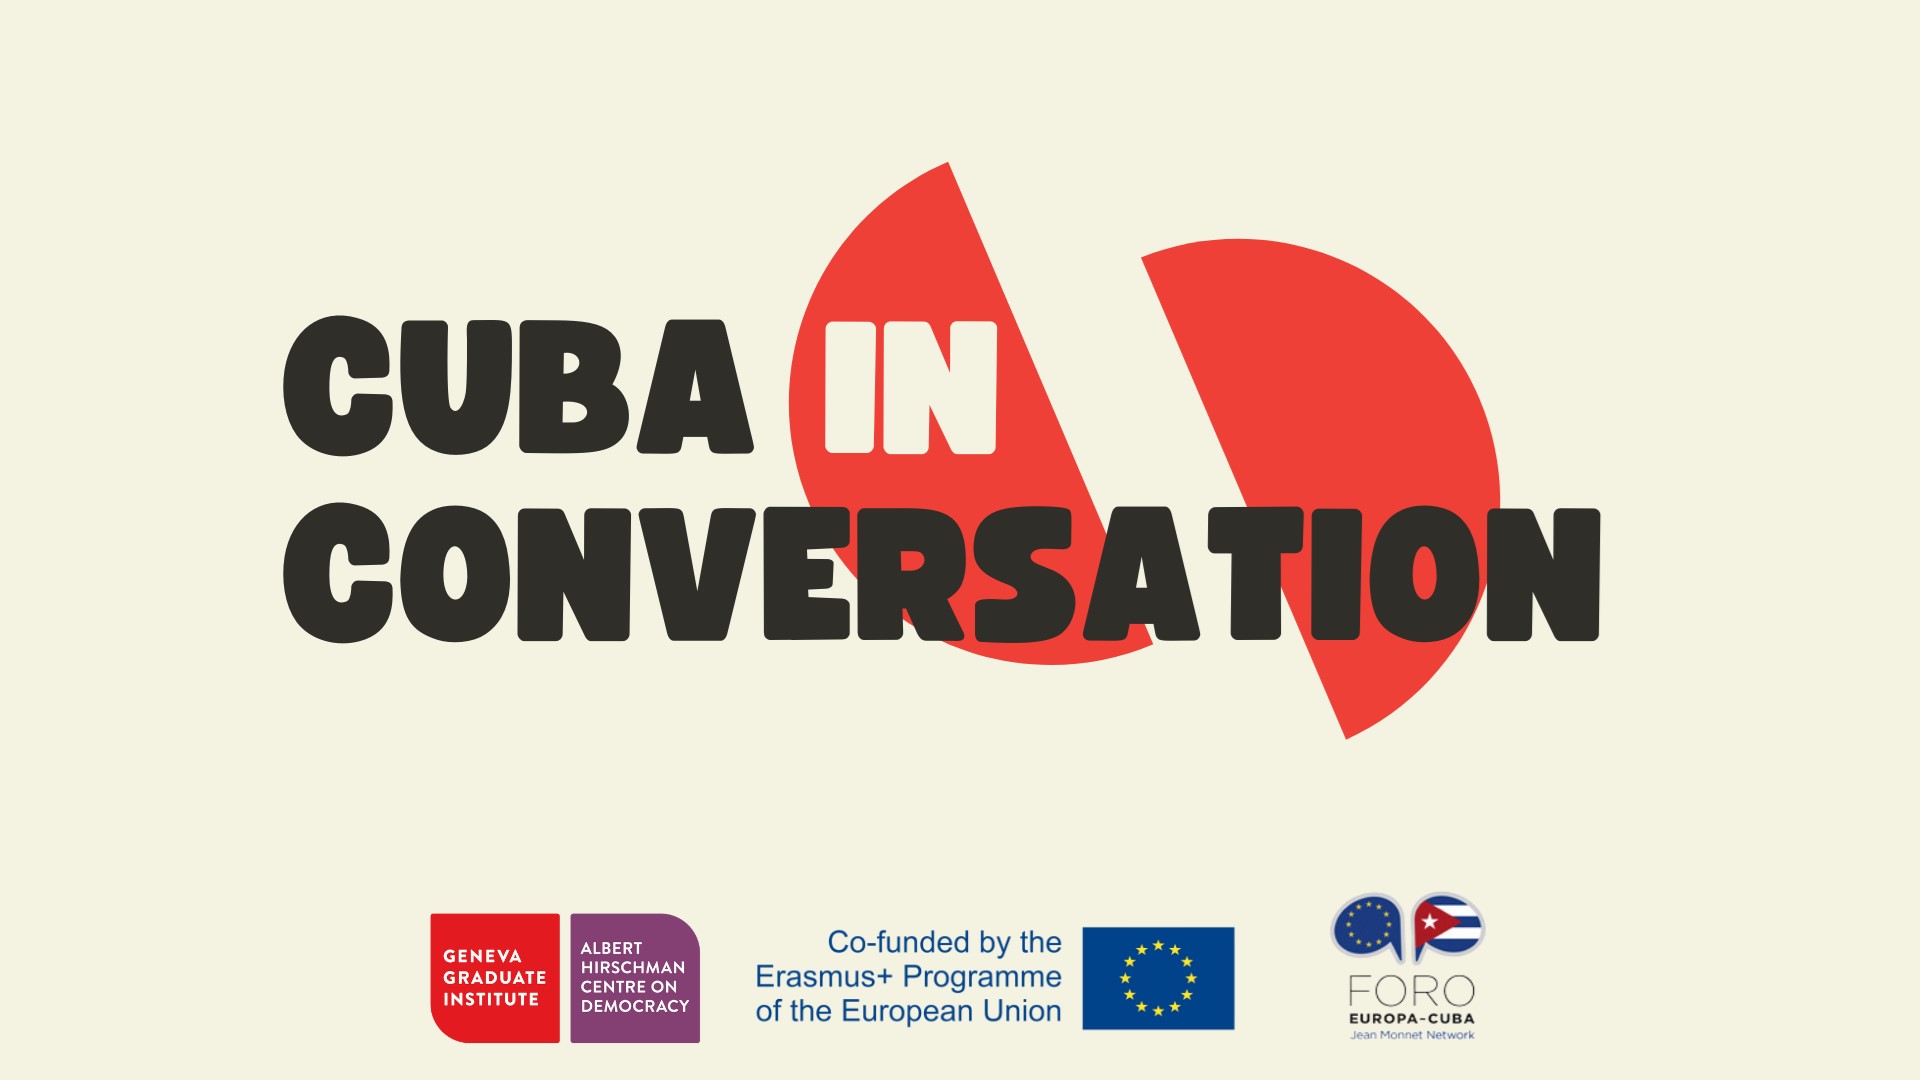 The Europe-Cuba Forum Network launches the Podcast “Cuba in Conversation” - Foro Europa-Cuba | Jean Monnet Network